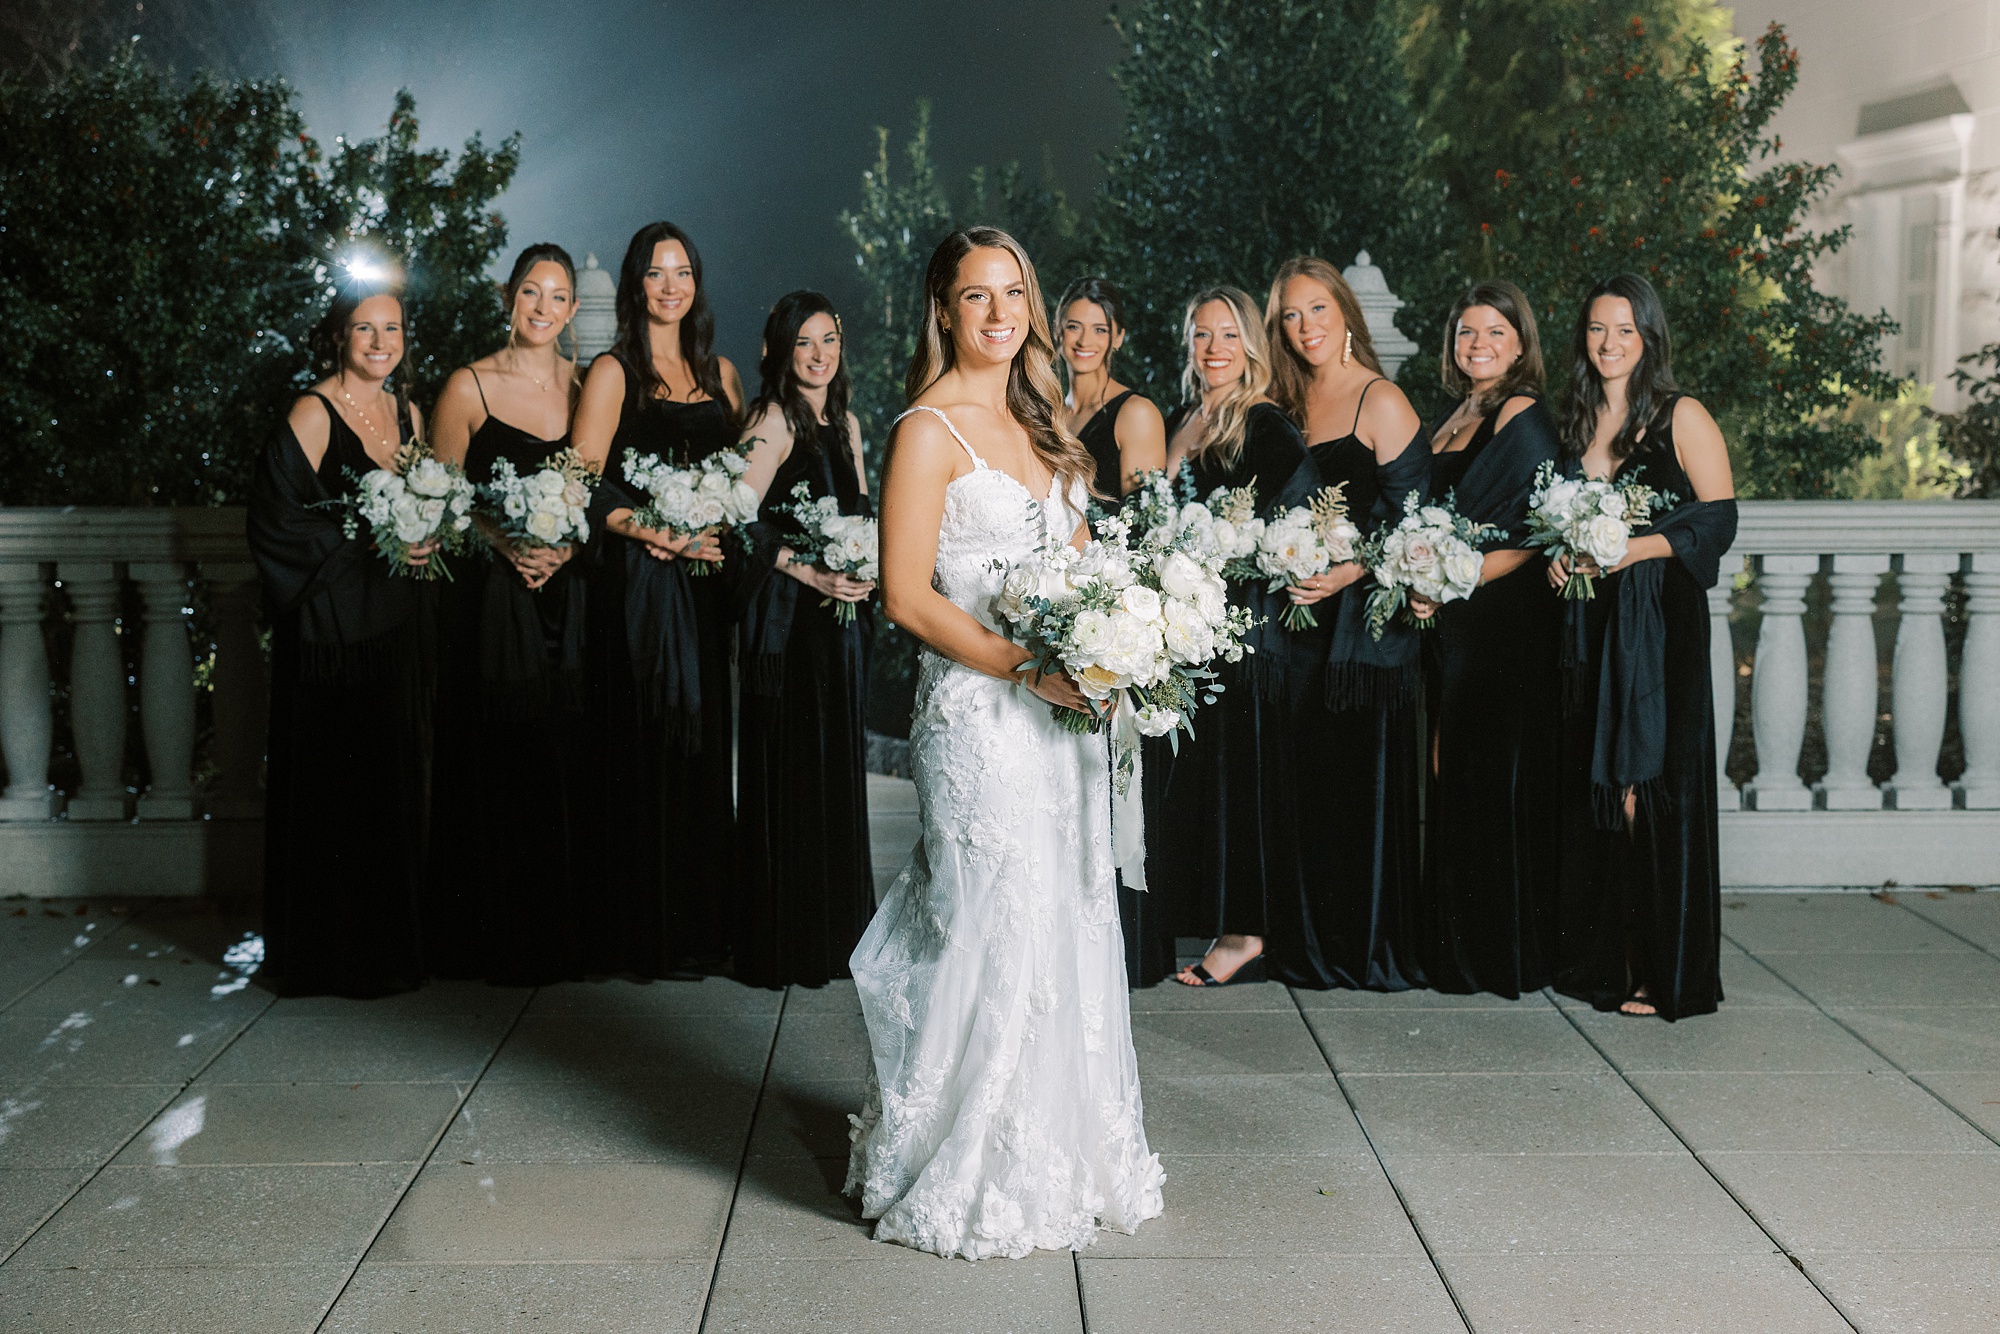 bride poses in front of bridesmaids during portraits in New Jersey park